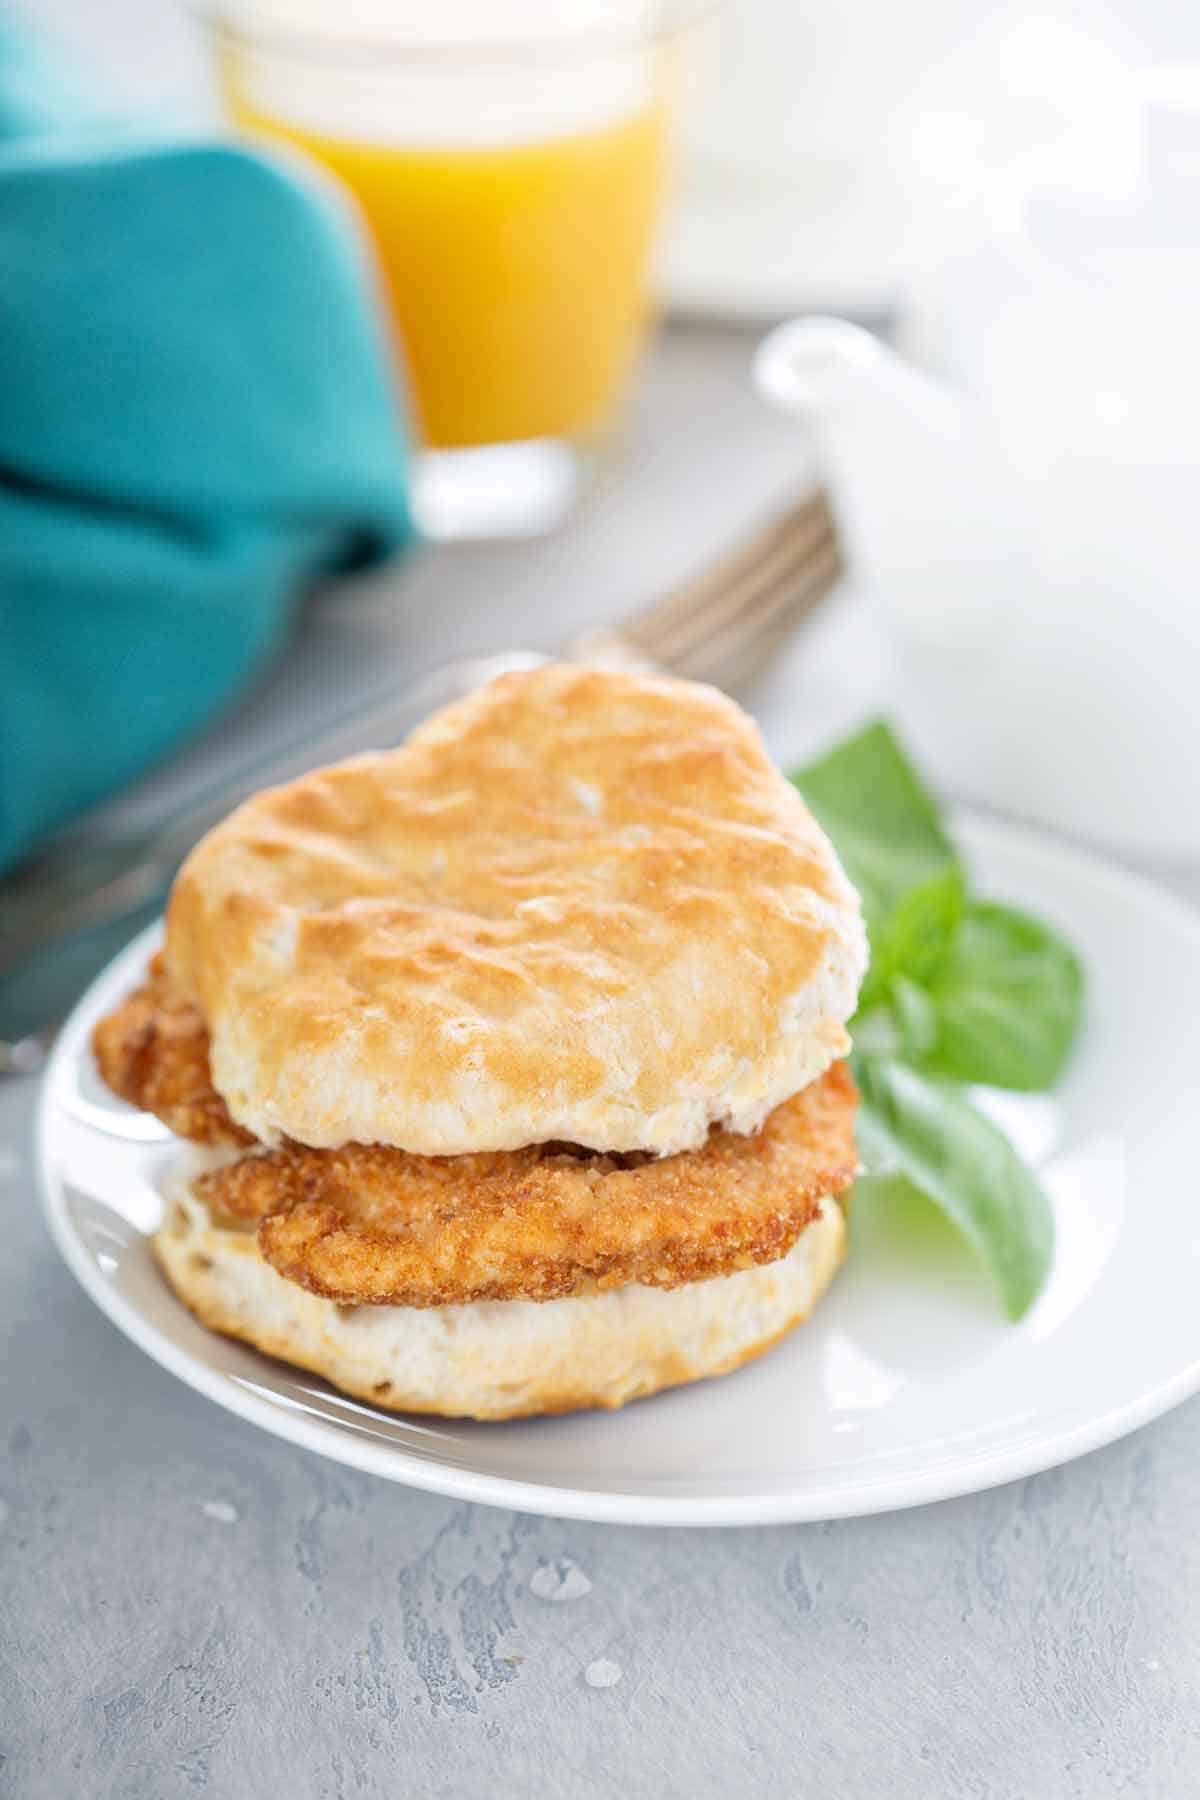 Chicken burger with a biscuit bun on a plate.